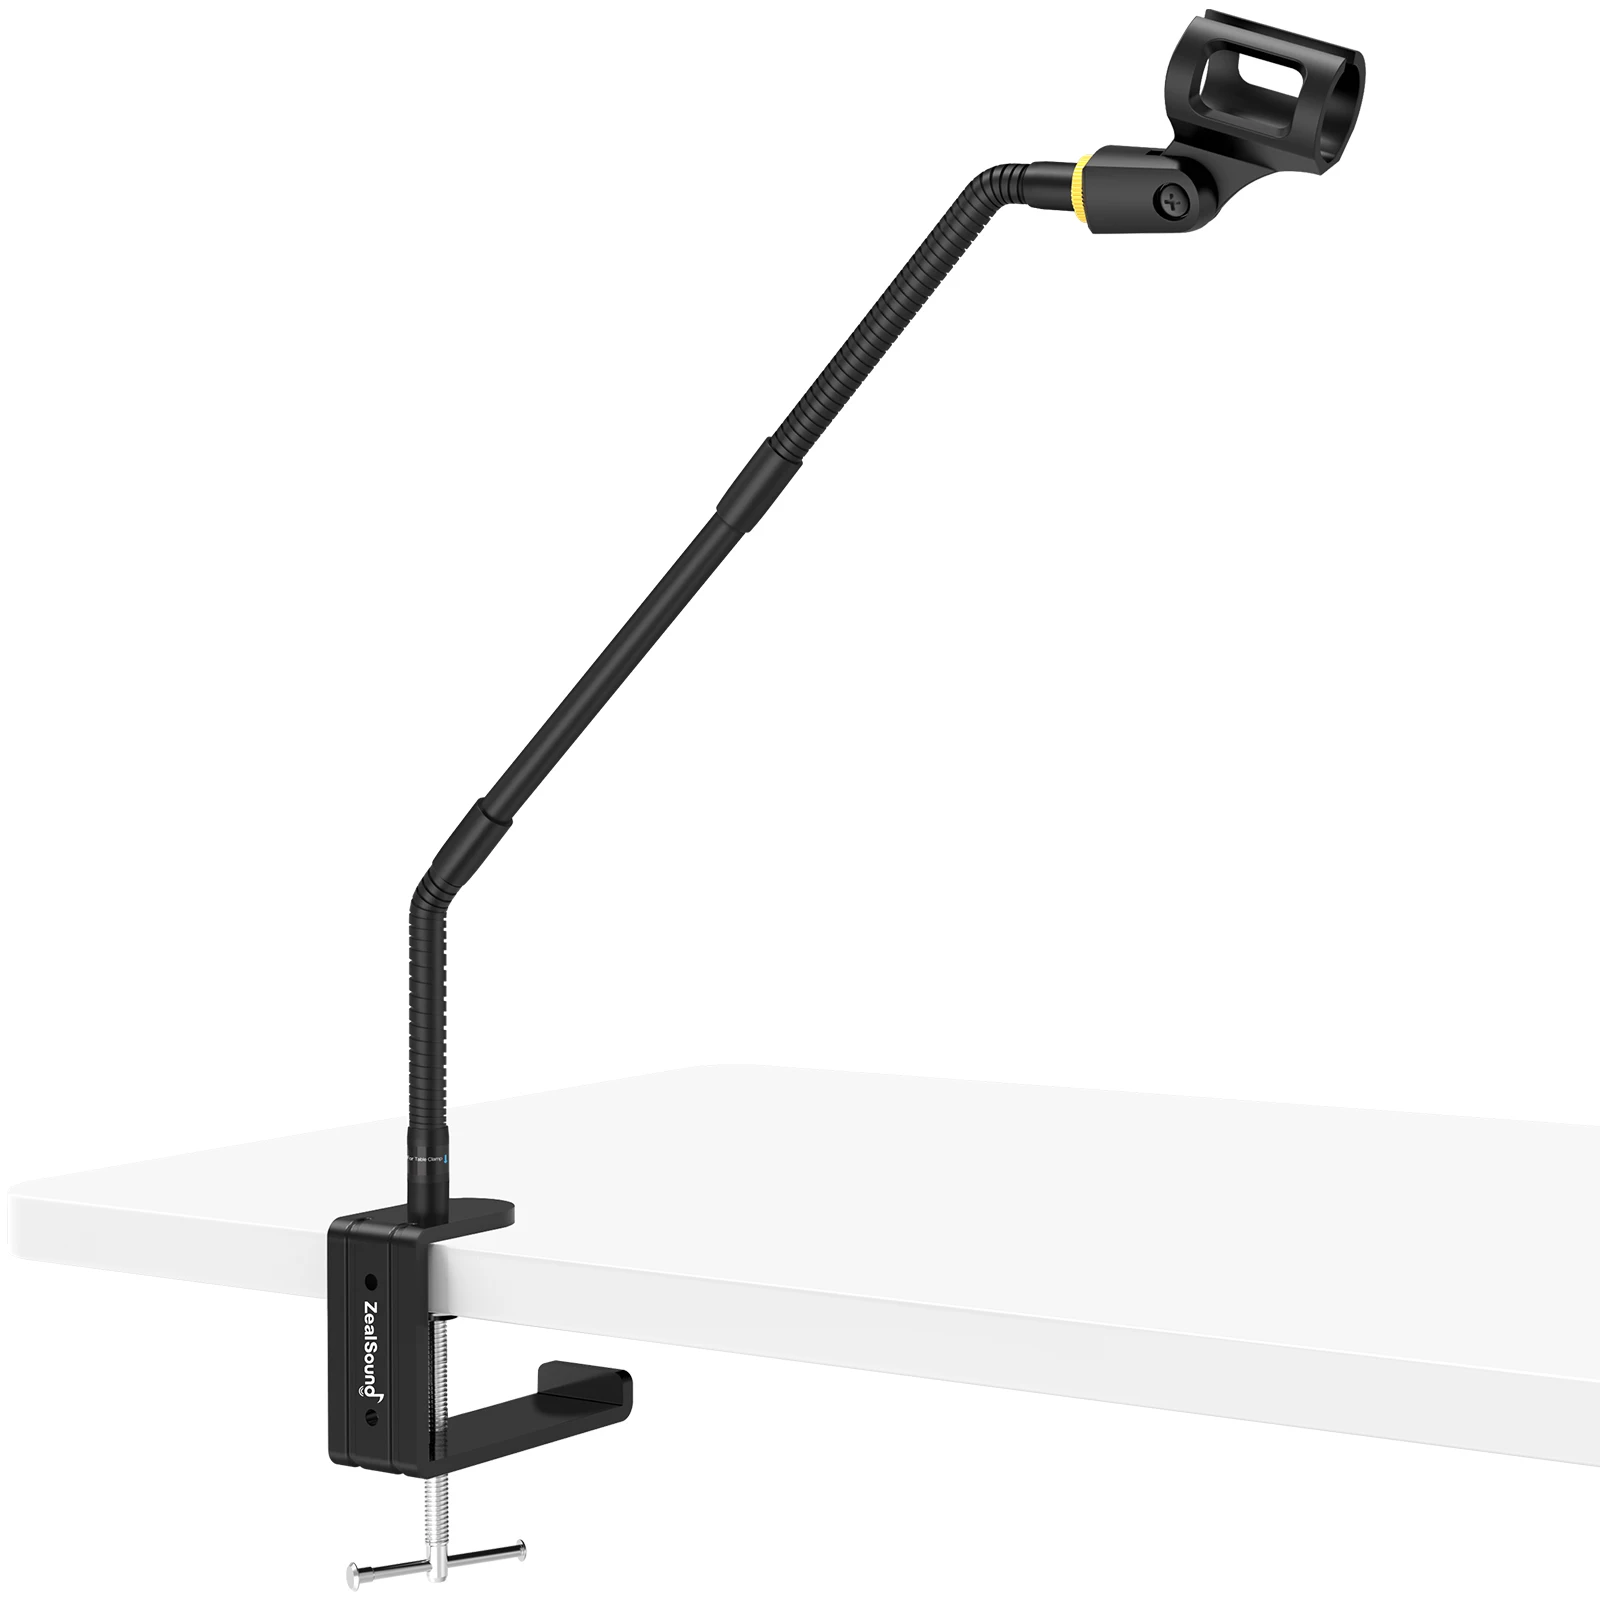 

New Professional Recording Microphone Stand Adjustable Universal Gooseneck Mic kit For for Video Record Communication Teaching